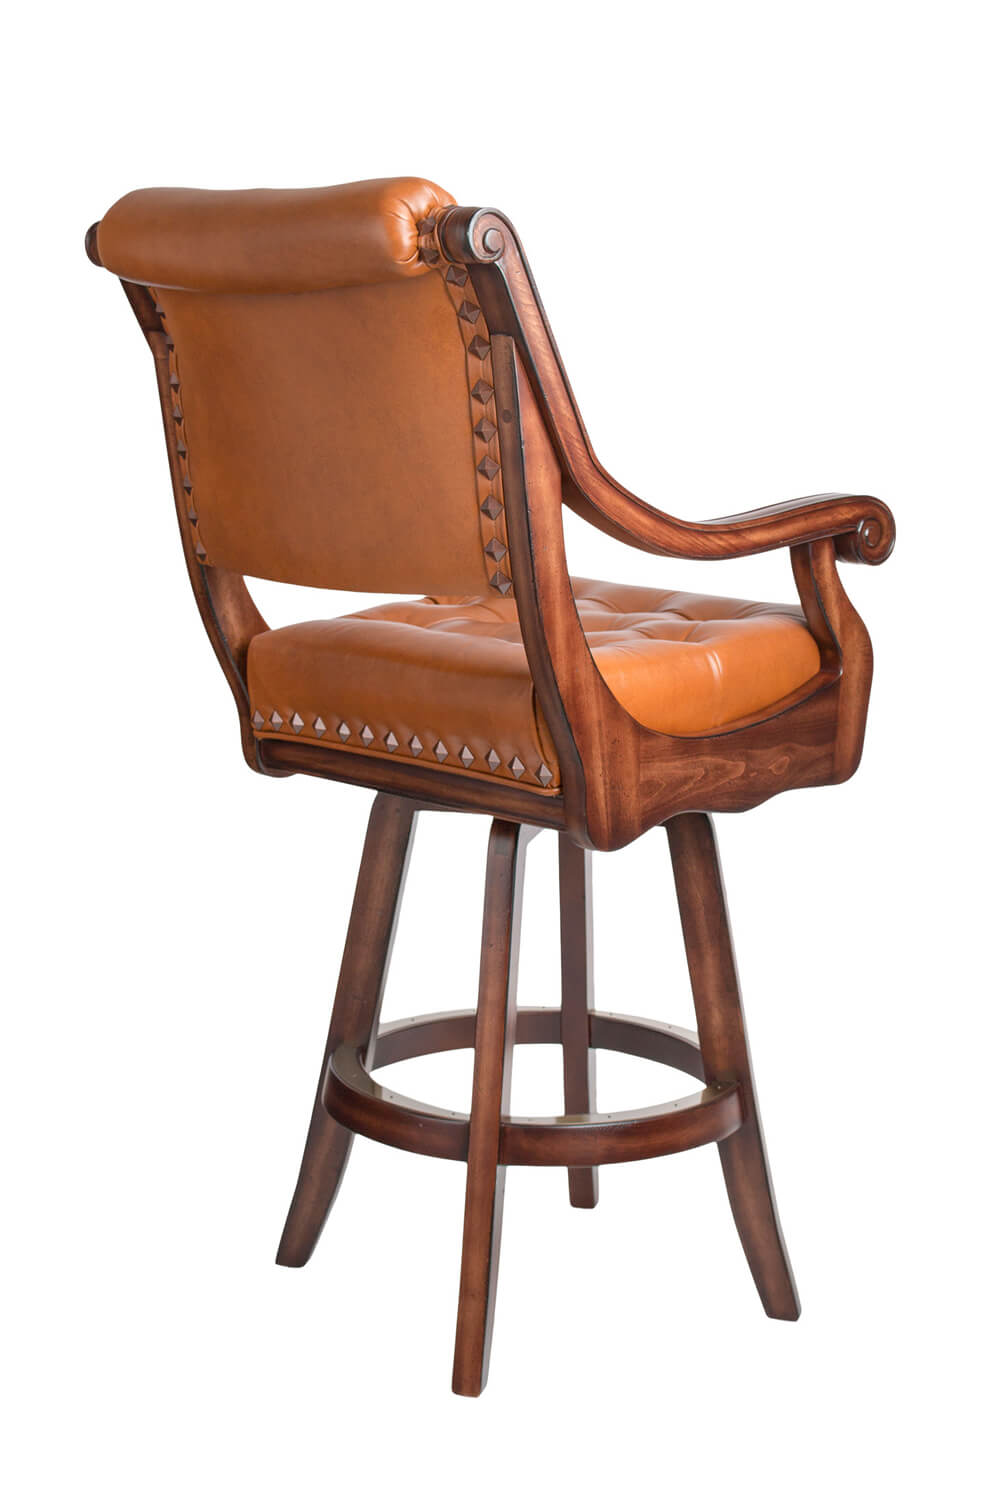 Ponce De Leon Wood Arm Swivel Stool, Brown Leather Bar Stools With Arms